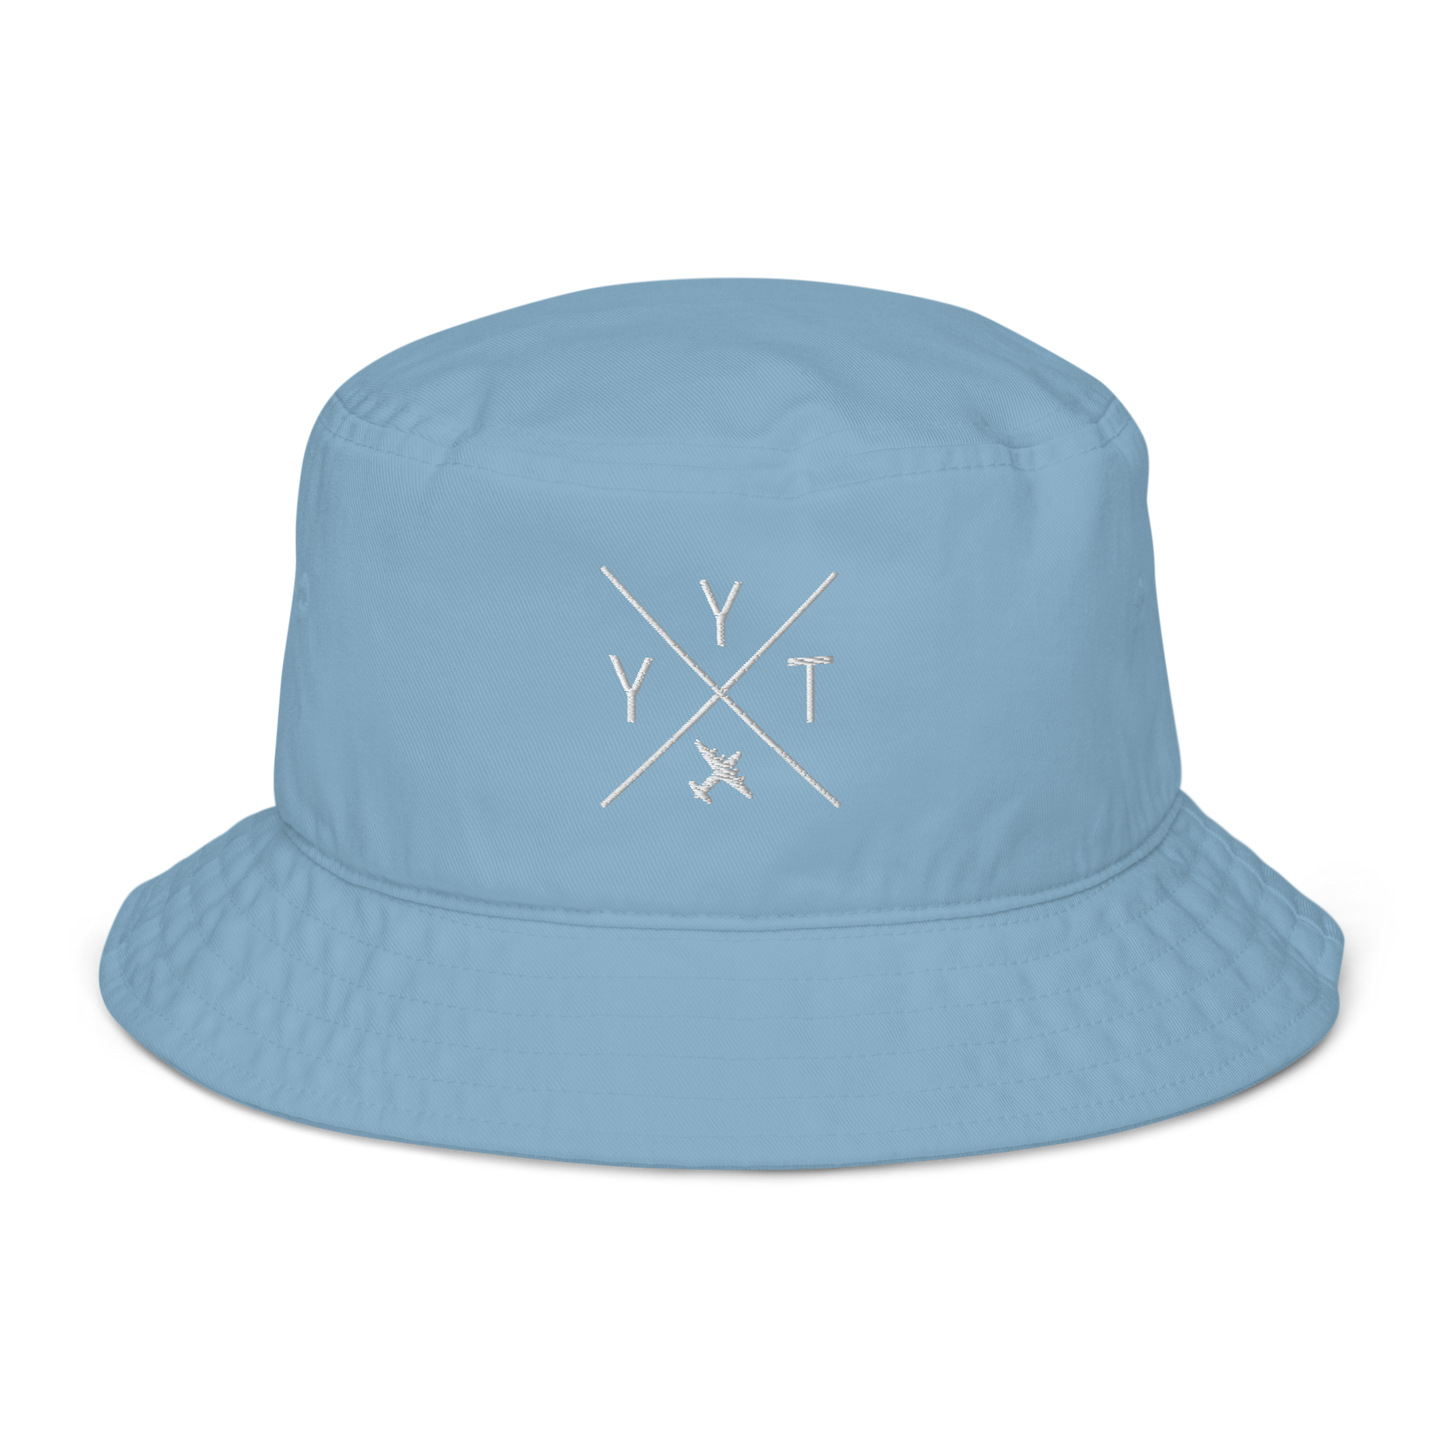 YHM Designs - YYT St. John's Organic Cotton Bucket Hat - Crossed-X Design with Airport Code and Vintage Propliner - White Embroidery - Image 07